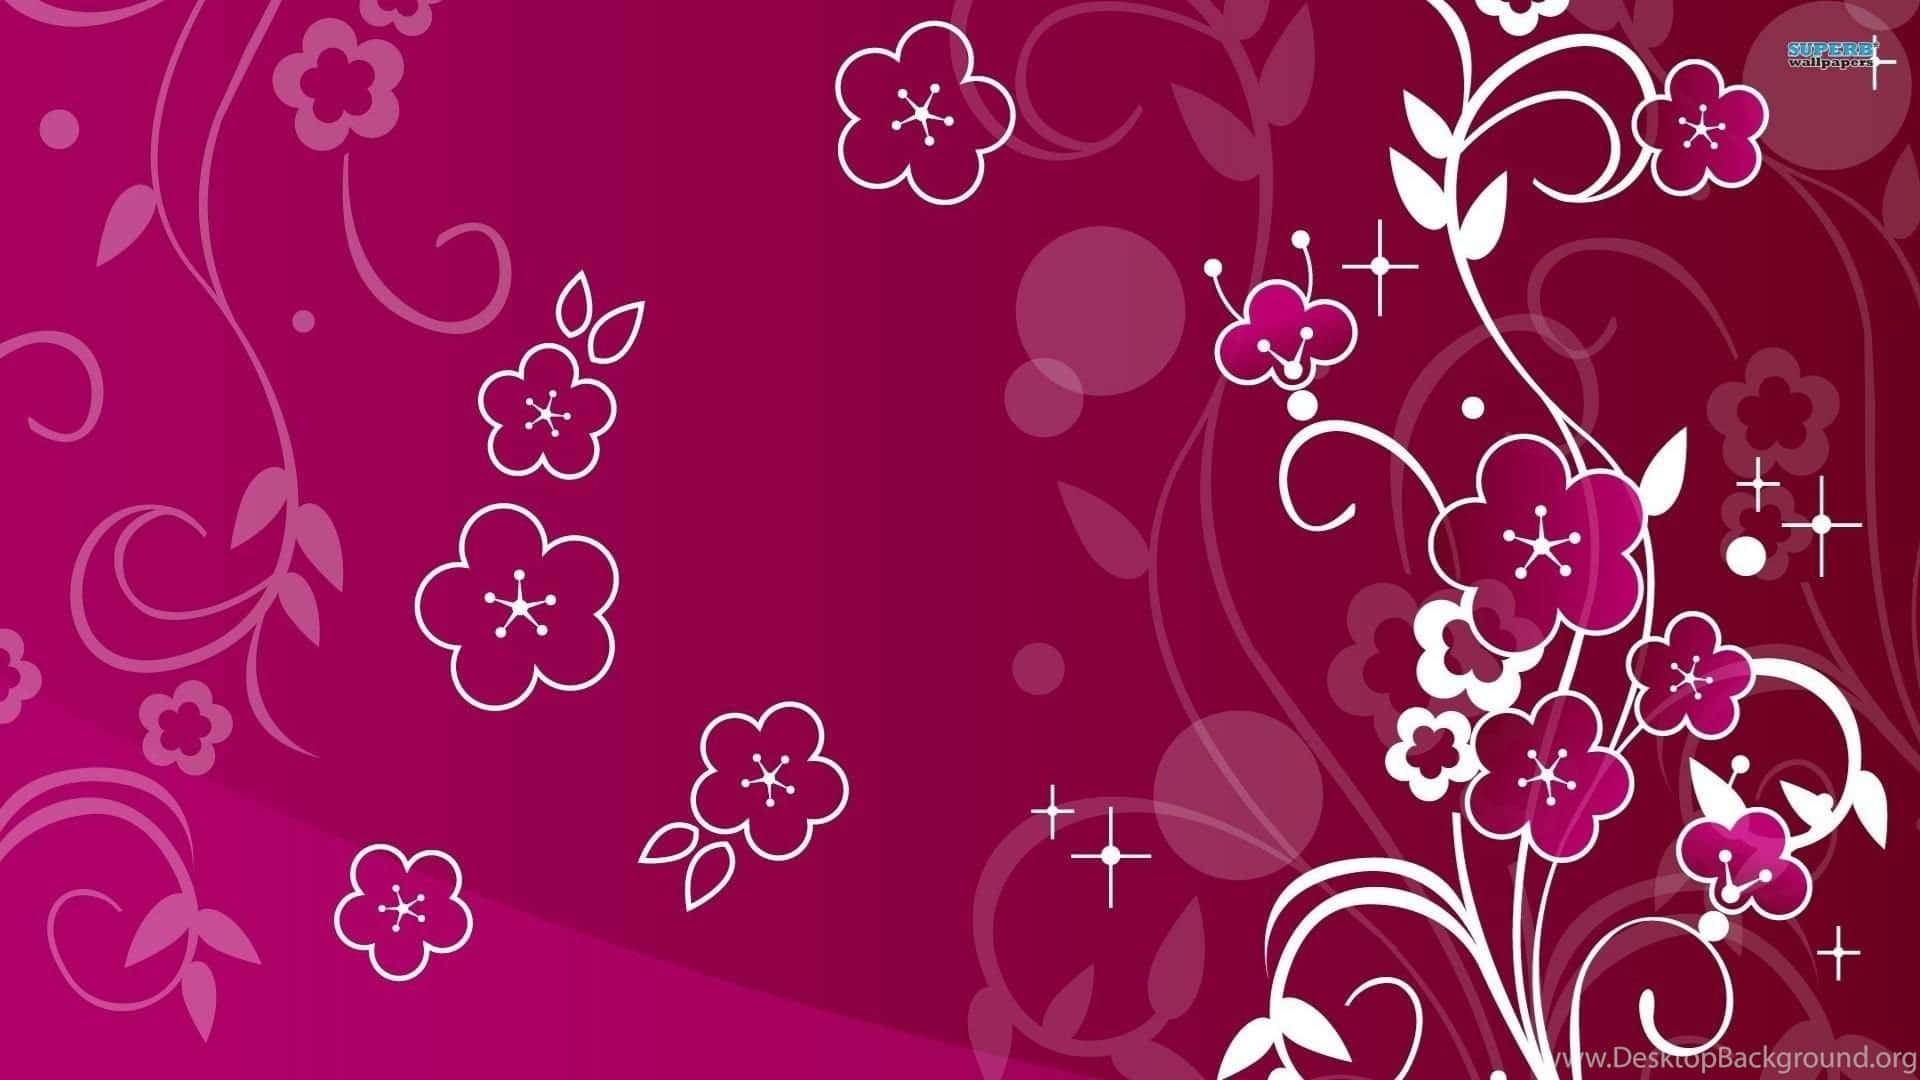 A Pink And White Floral Wallpaper With White Flowers